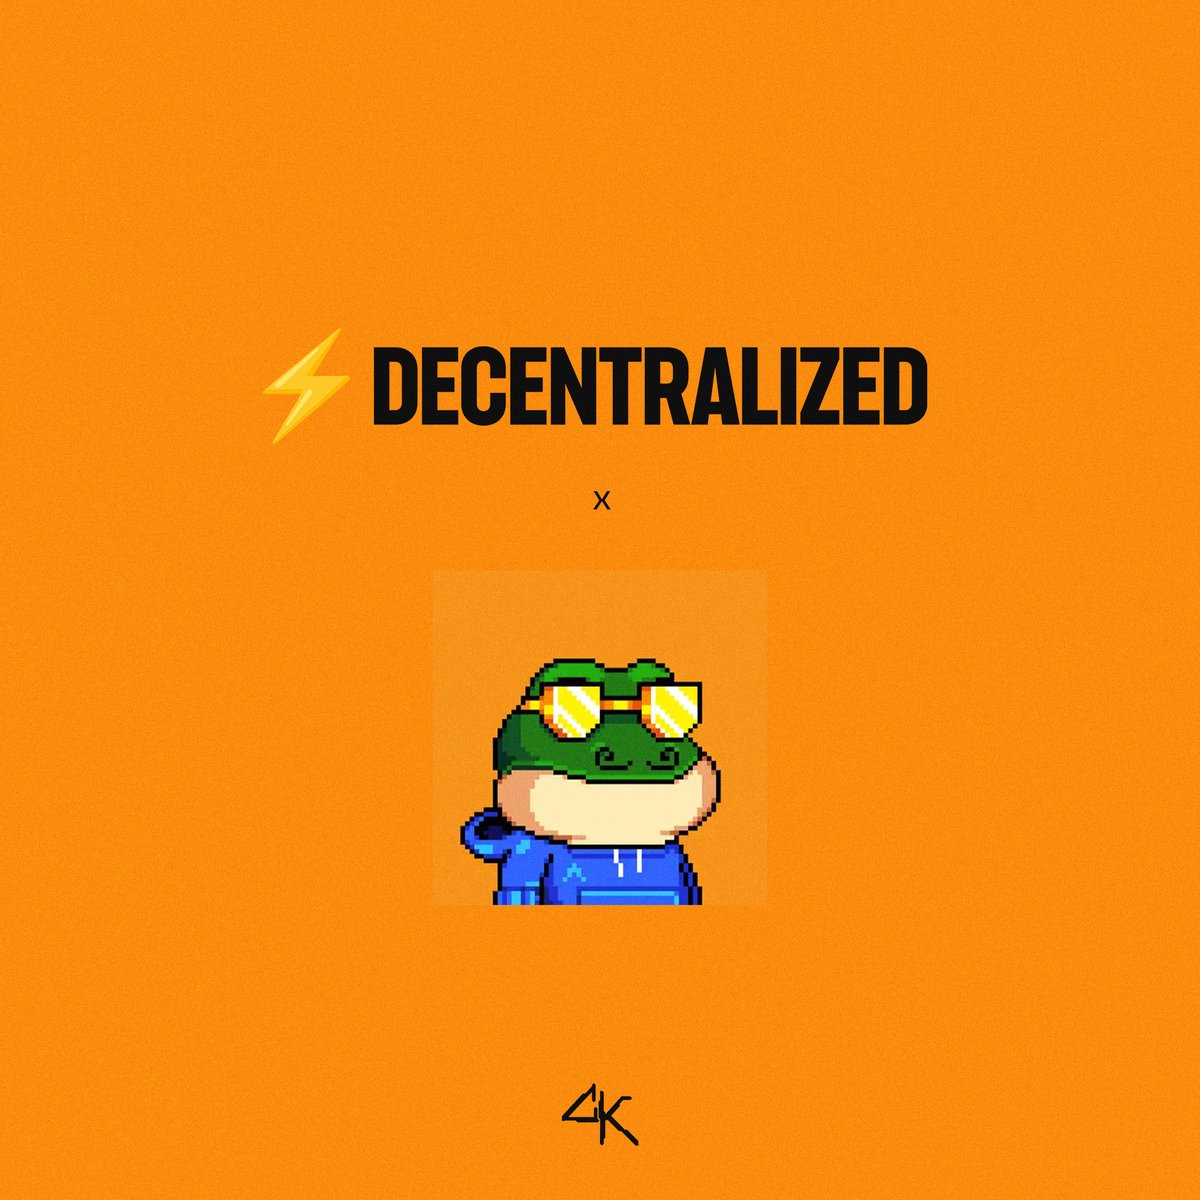 Welcome to ⚡️DECENTRALIZED, @BitcoinFrogs.